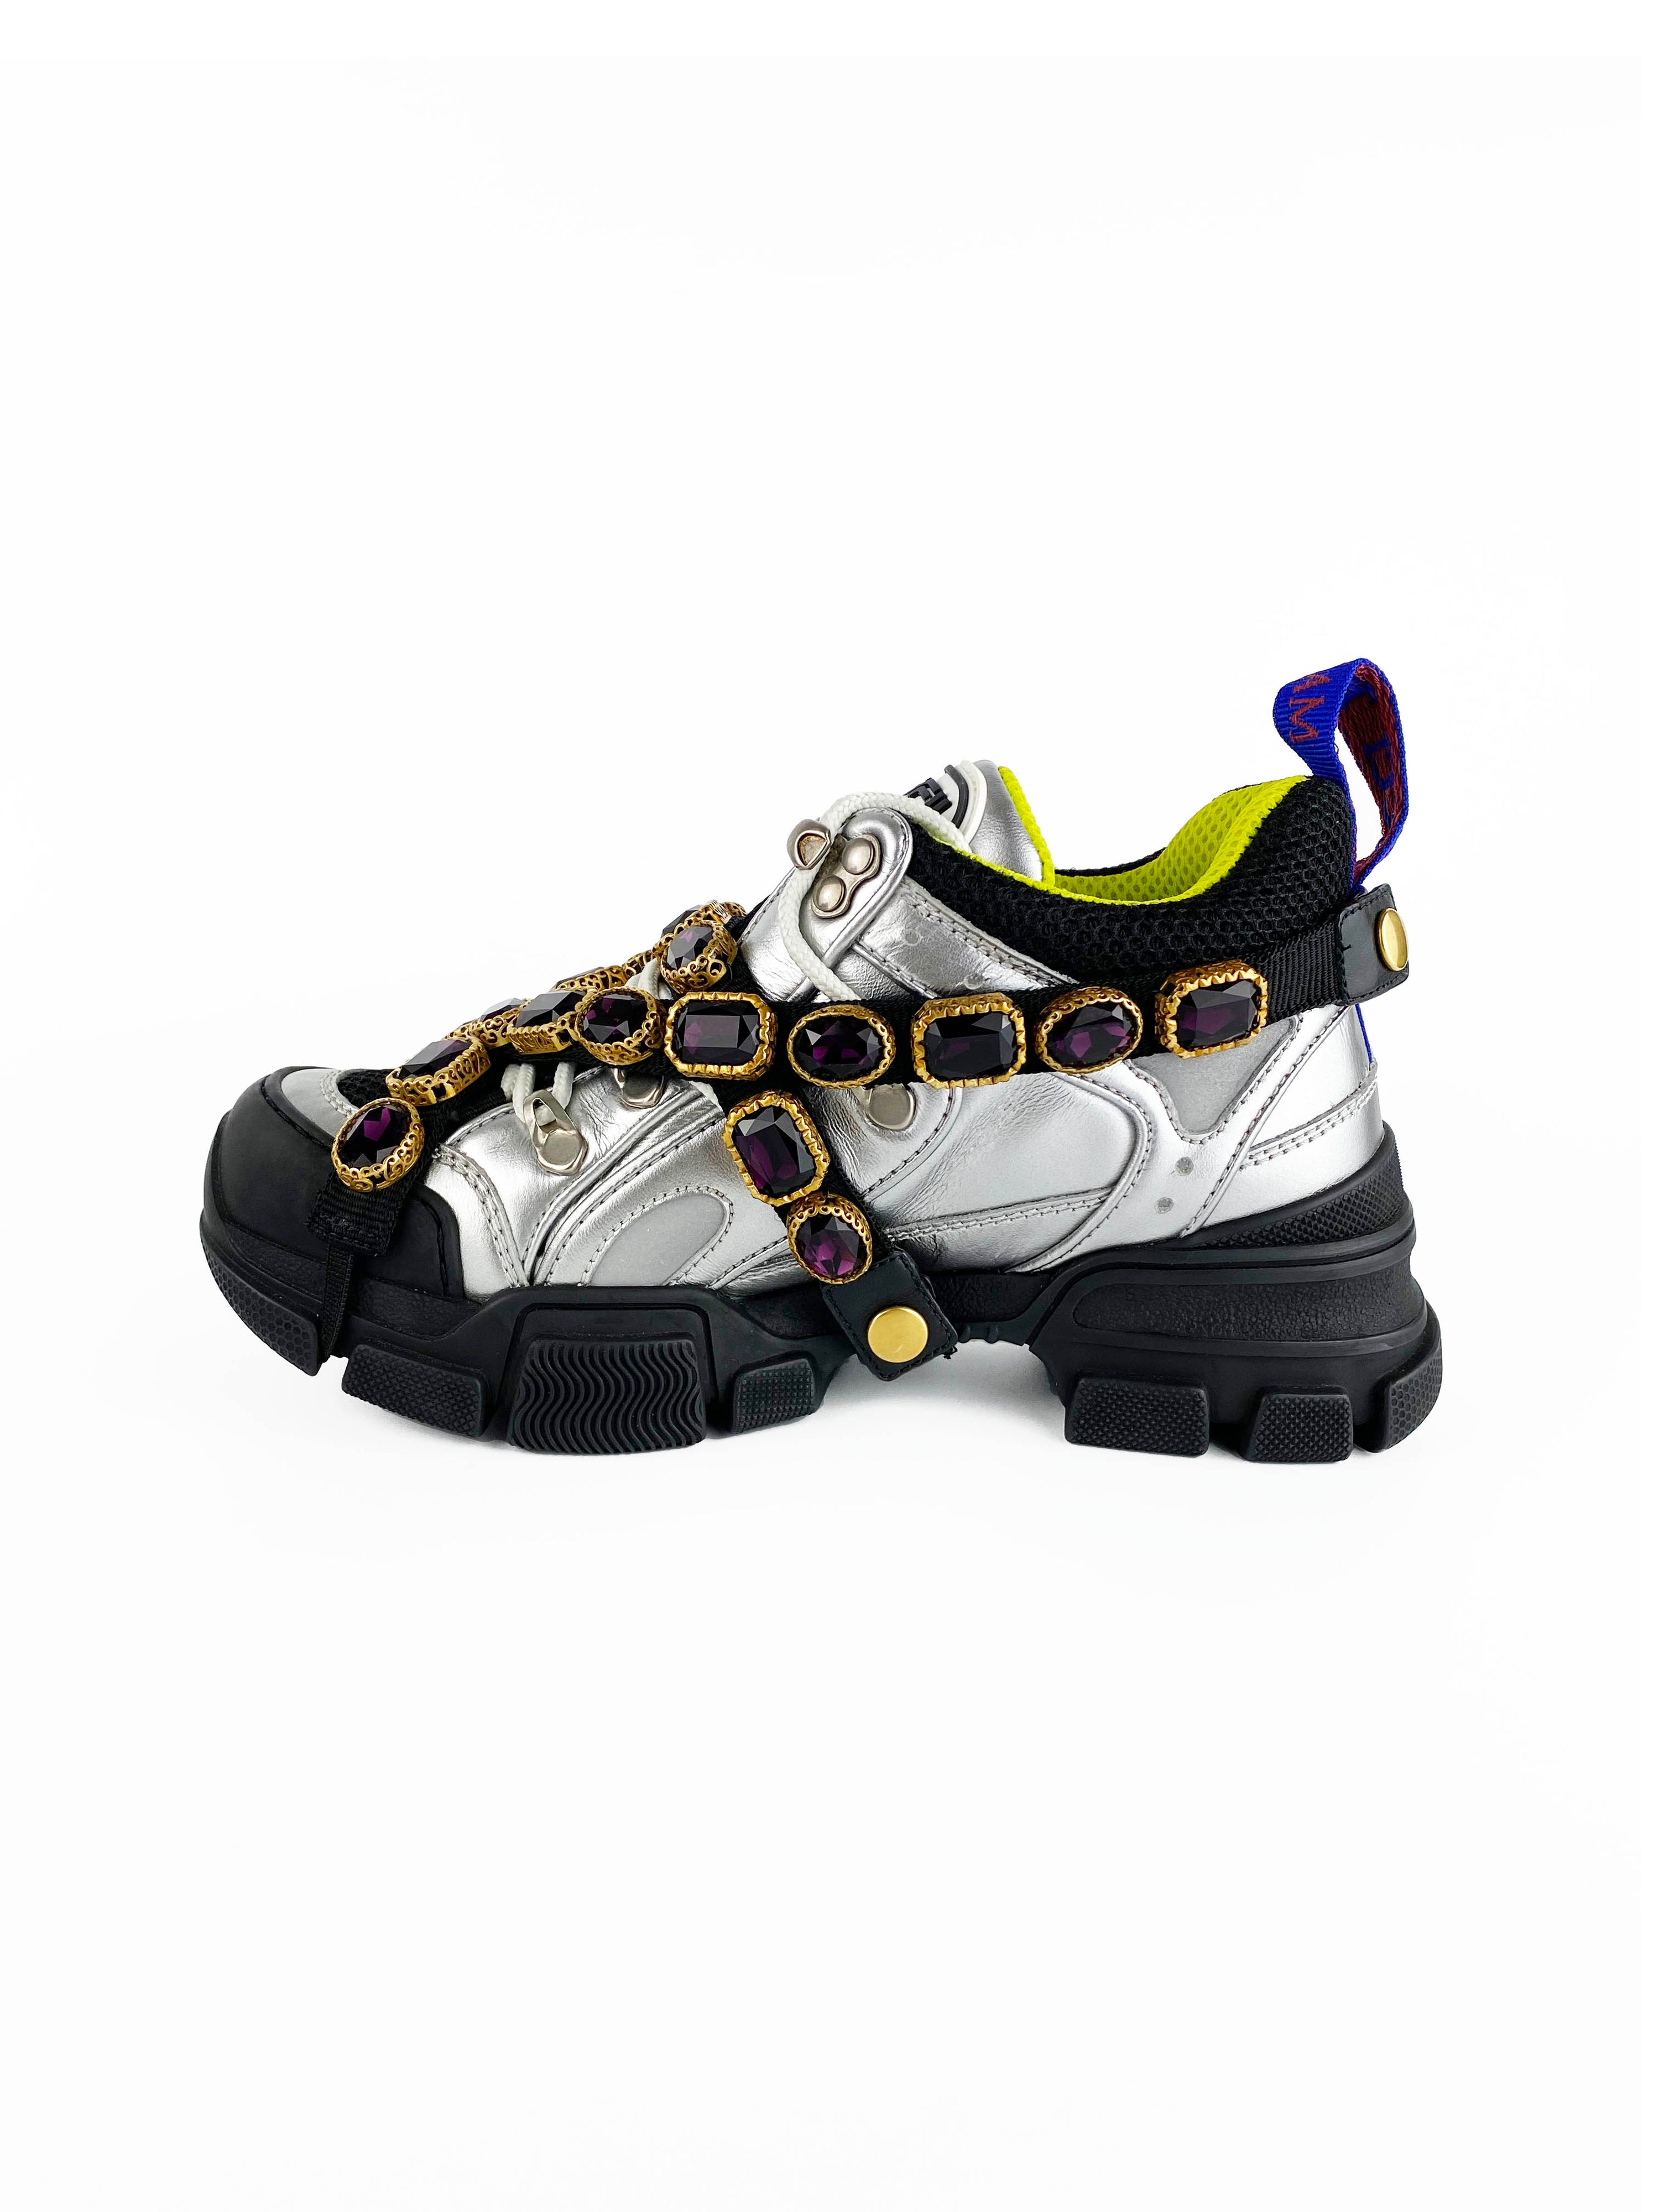 Gucci Silver Flashtrek Sneakers with Removable Crystals 36.5